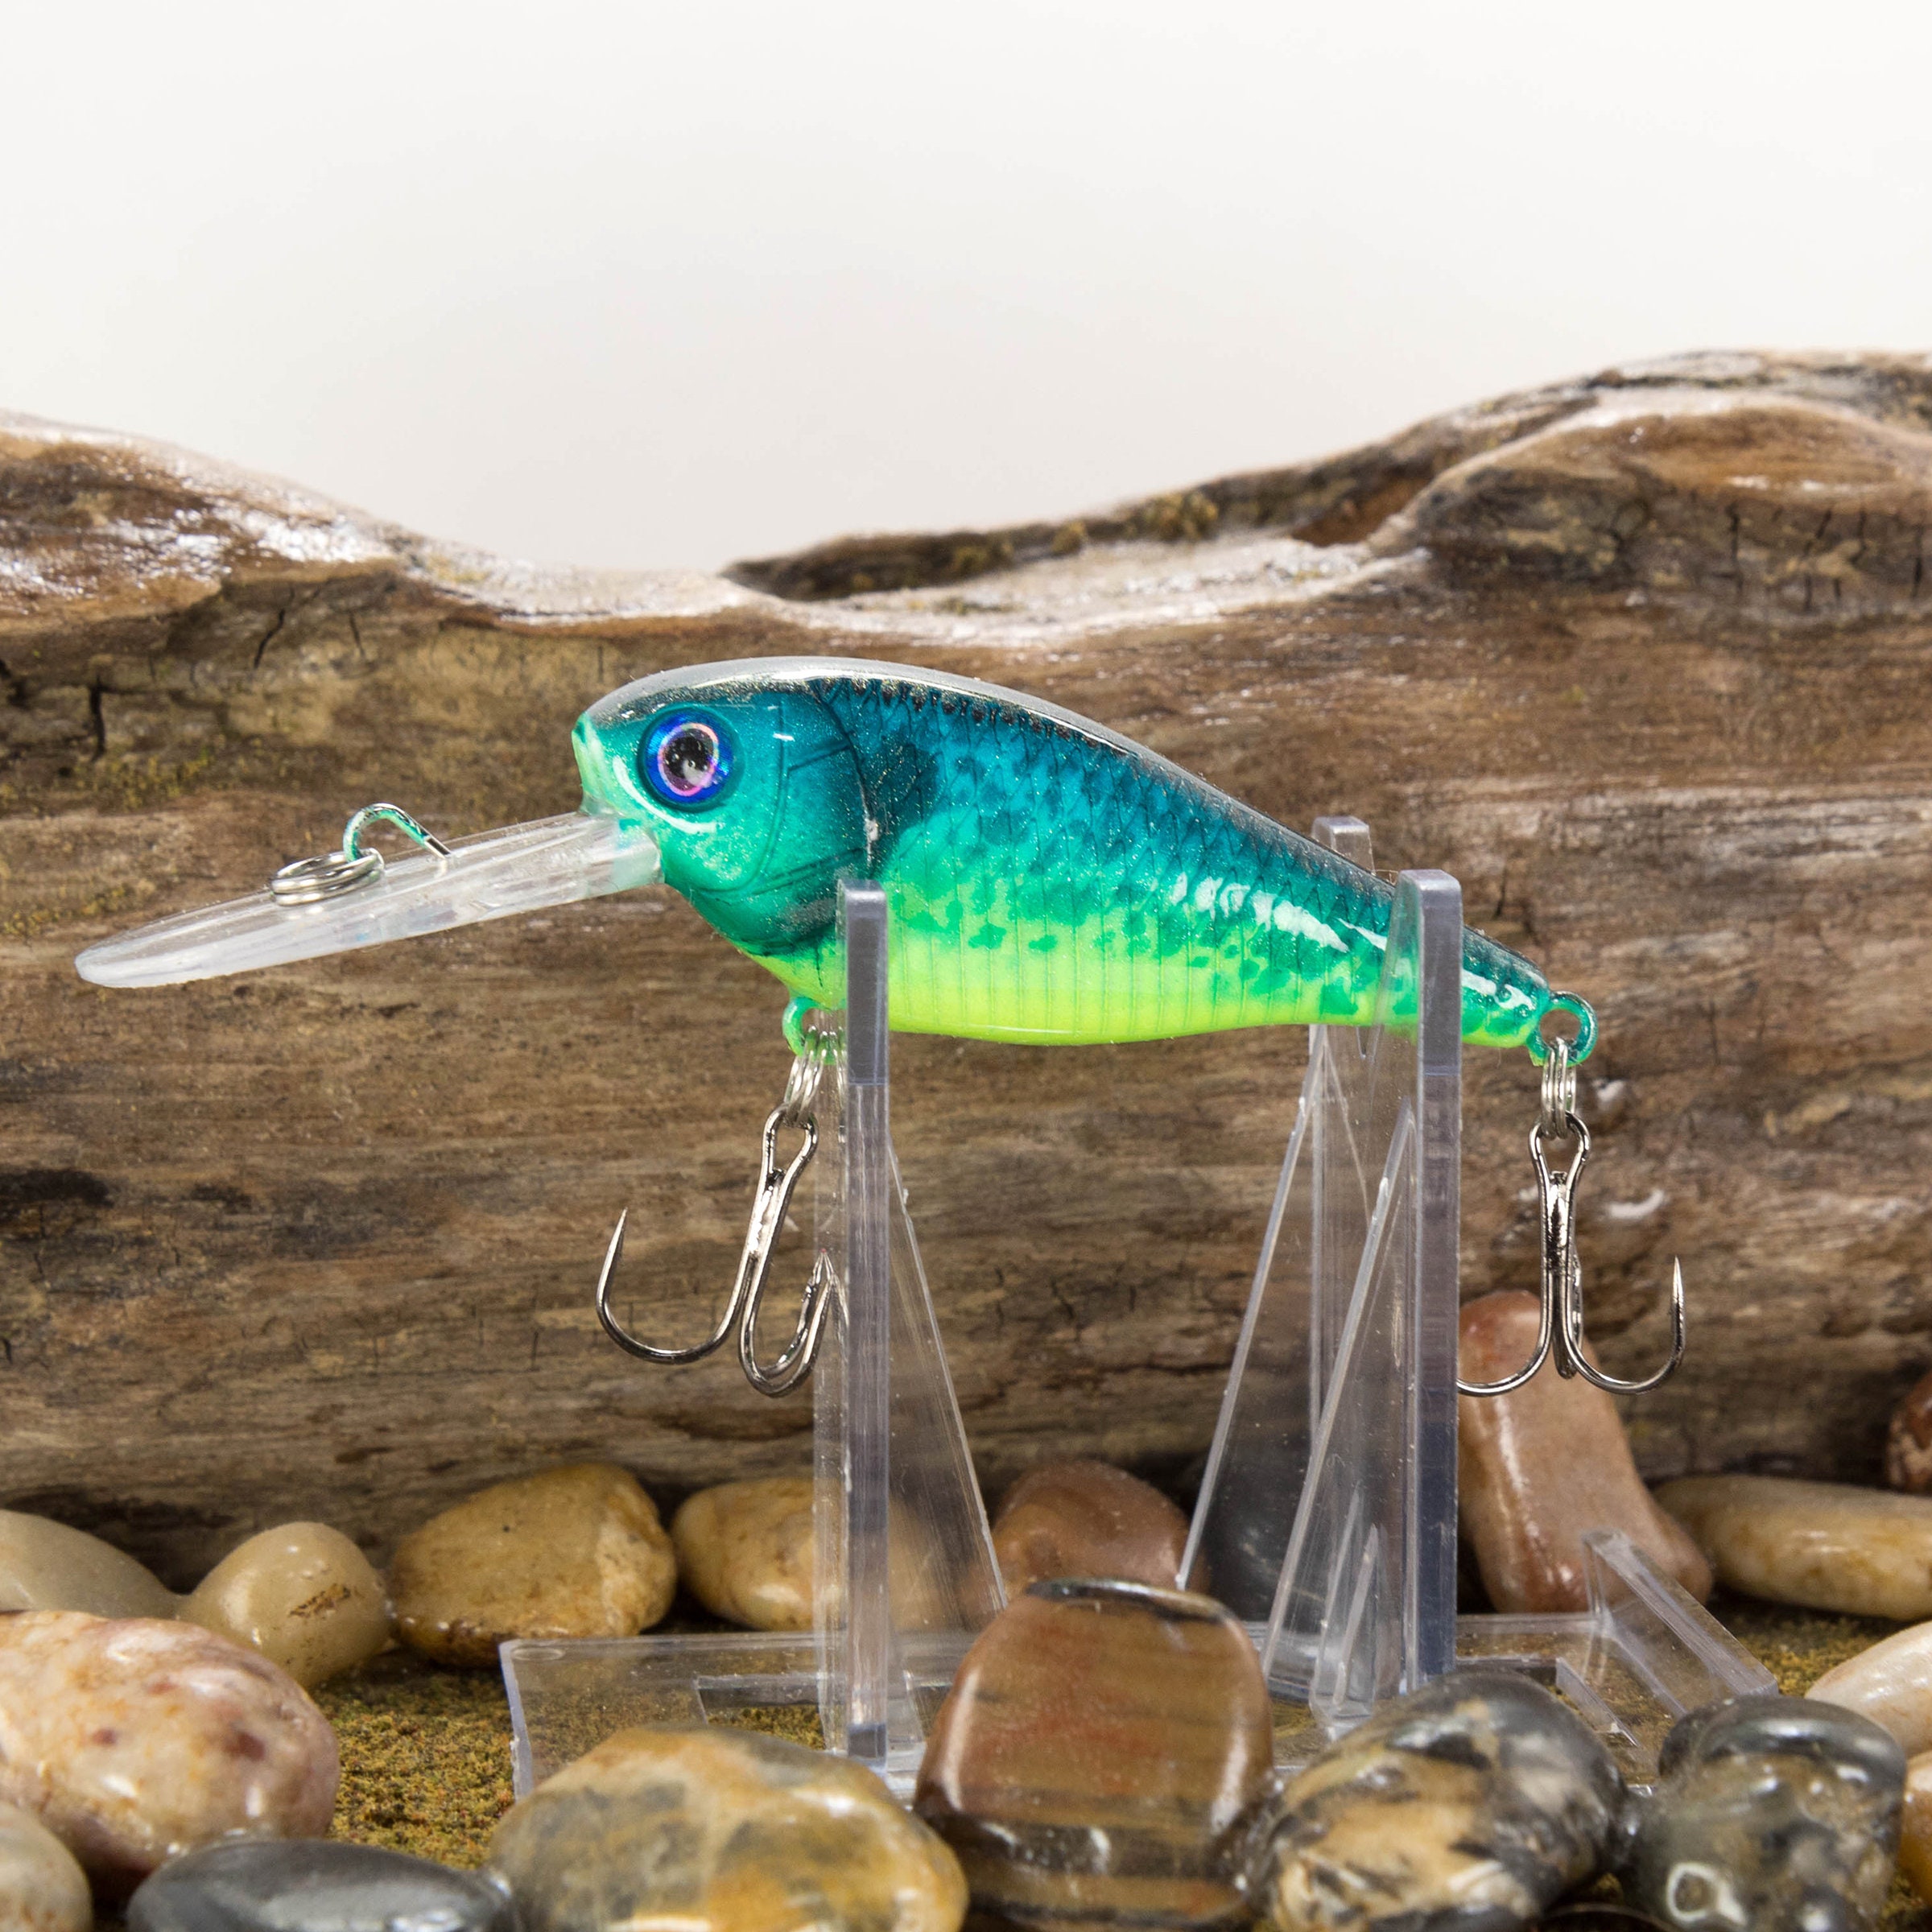 Discontinued Lures 